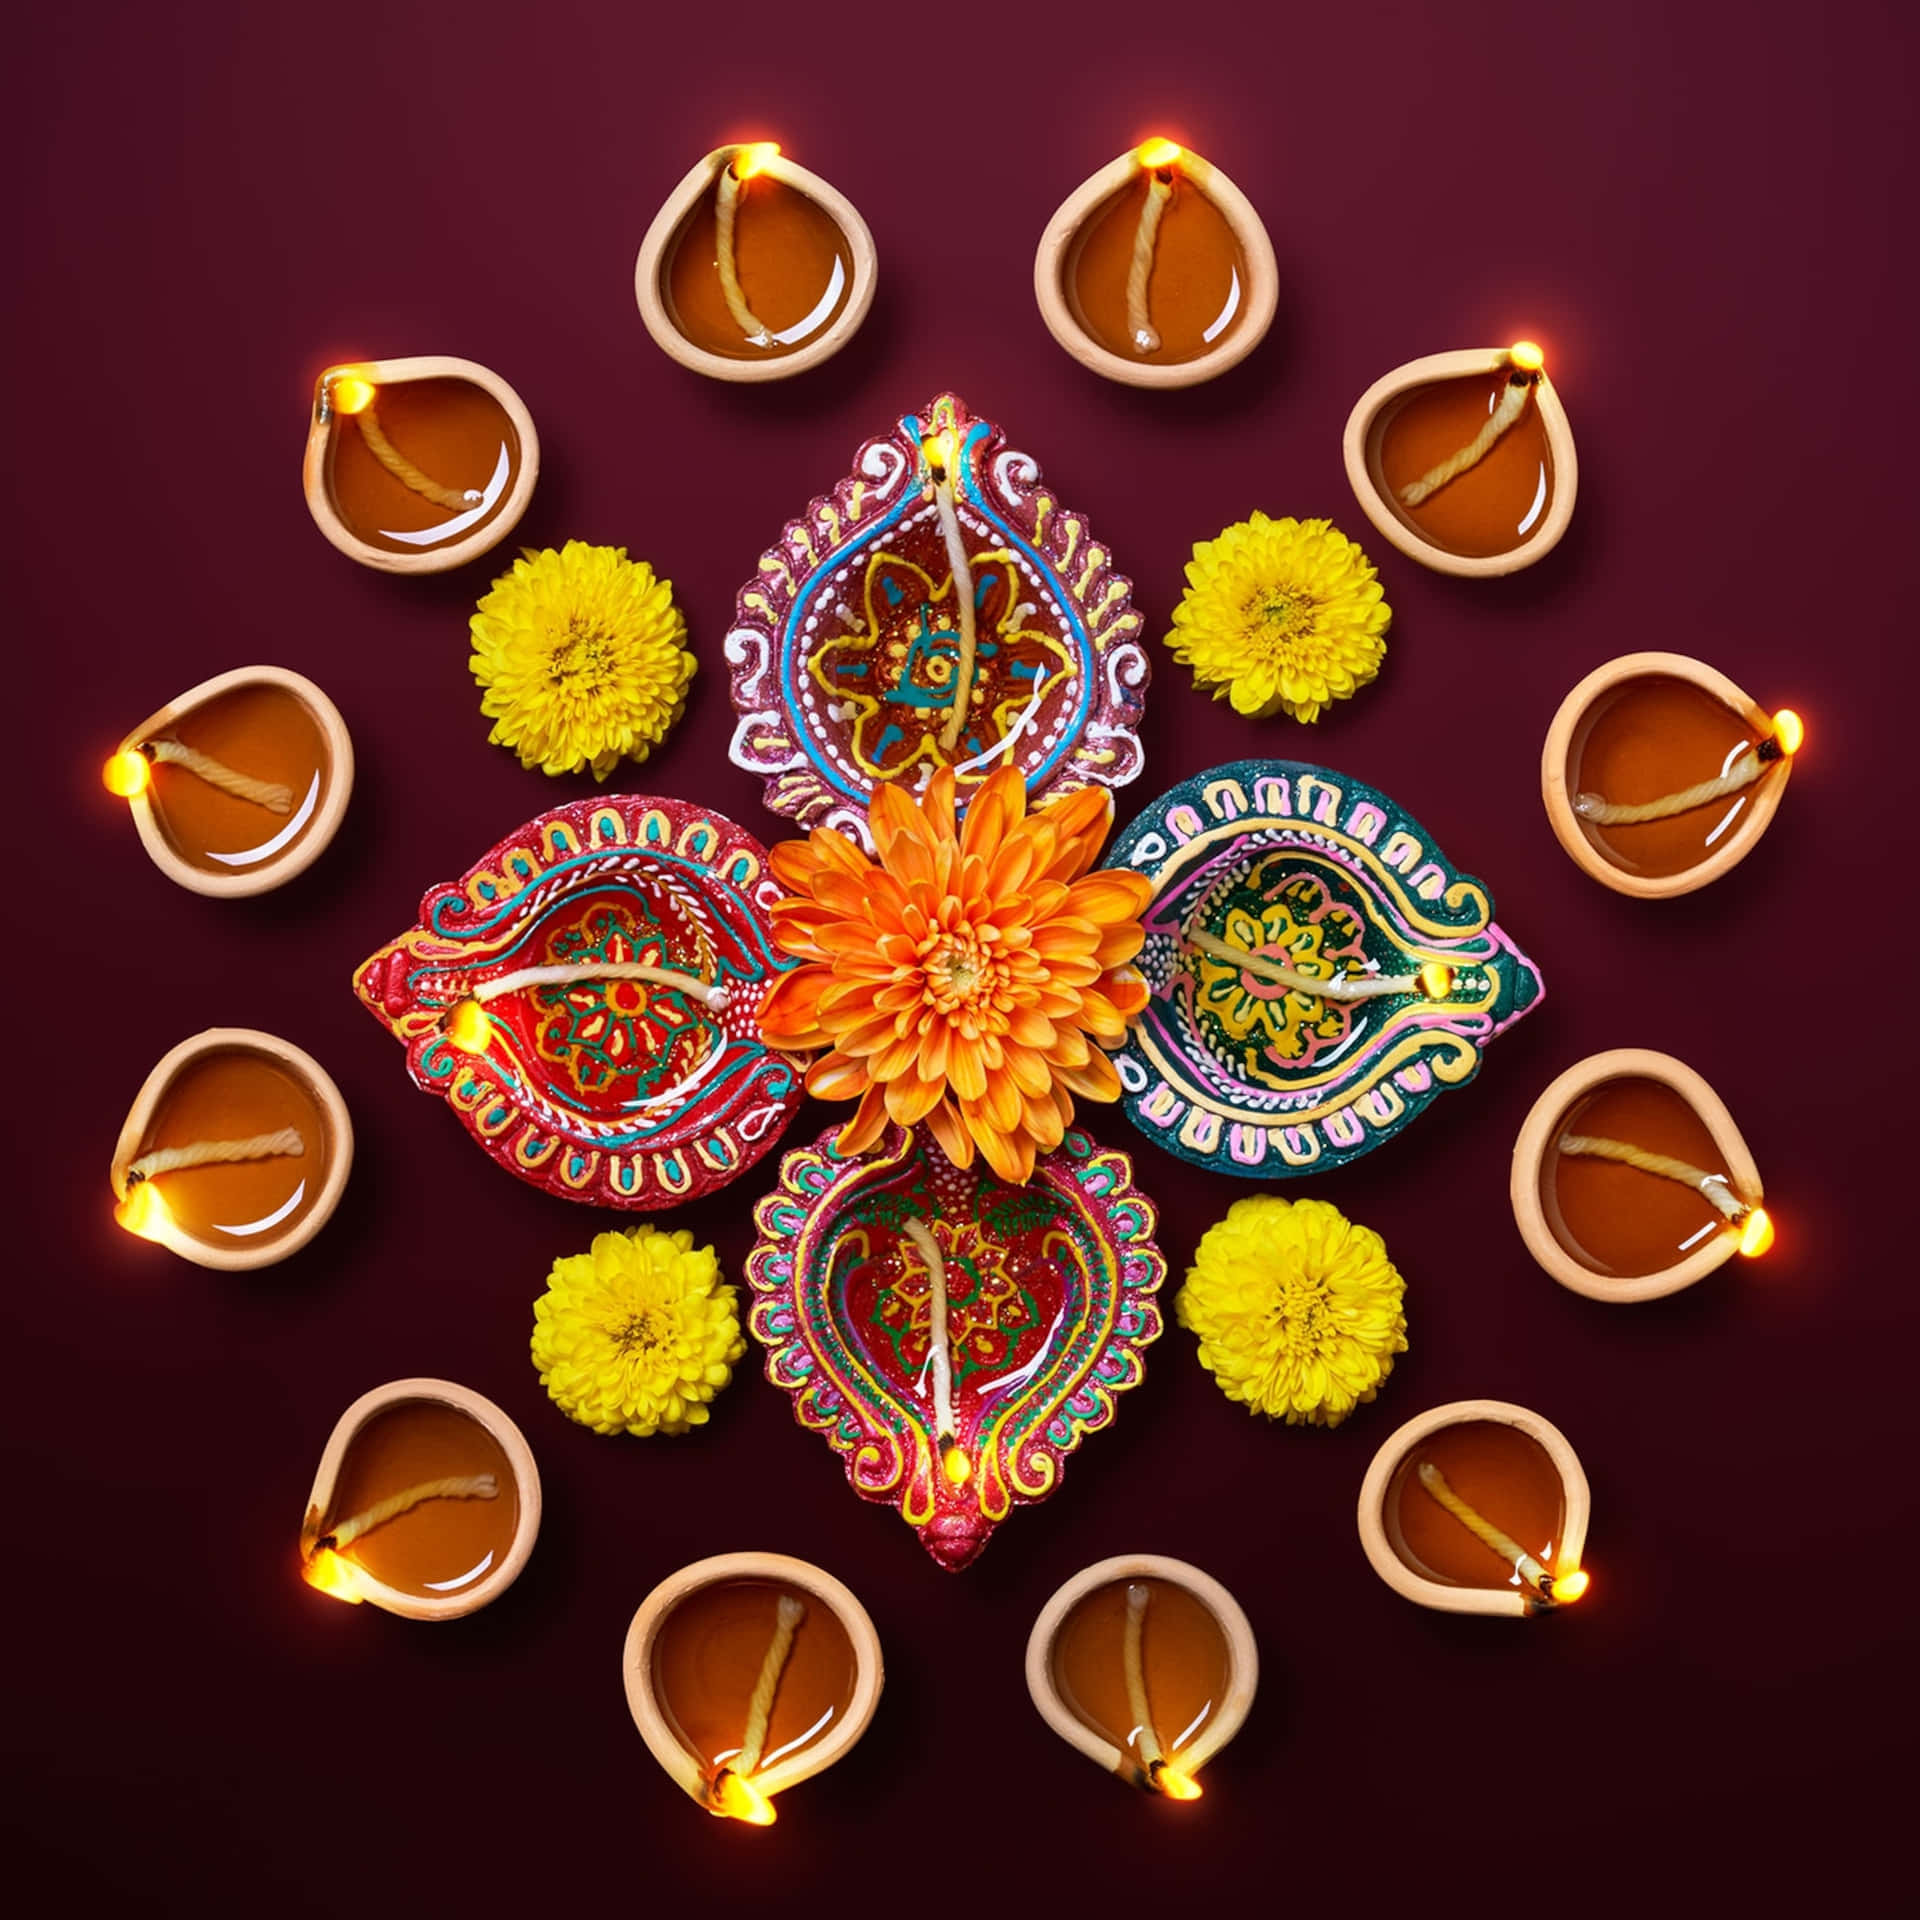 diwali diyas with colorful flowers and candles on a dark background